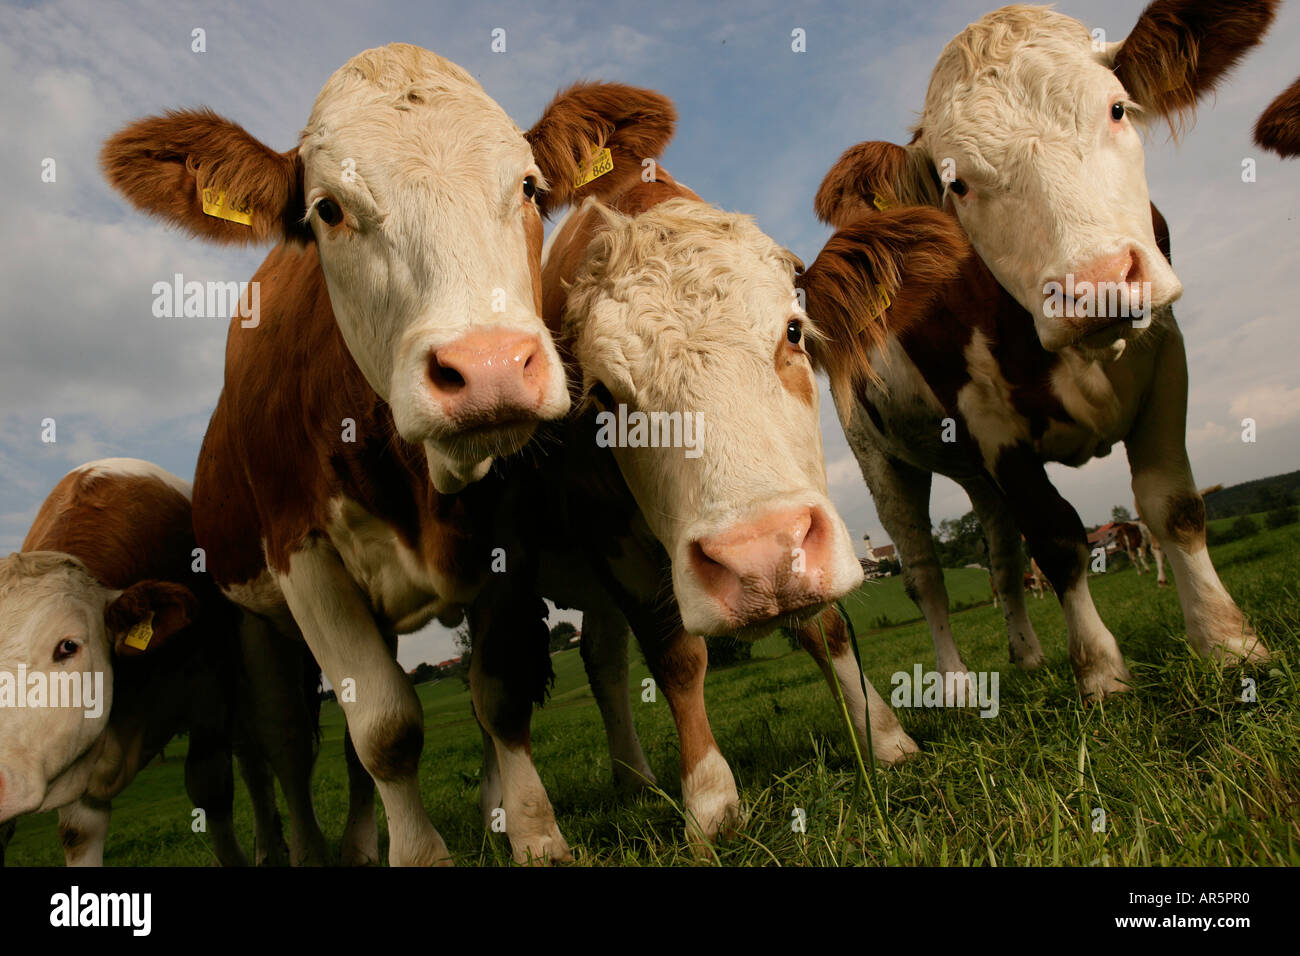 Flock of cows, front view Stock Photo